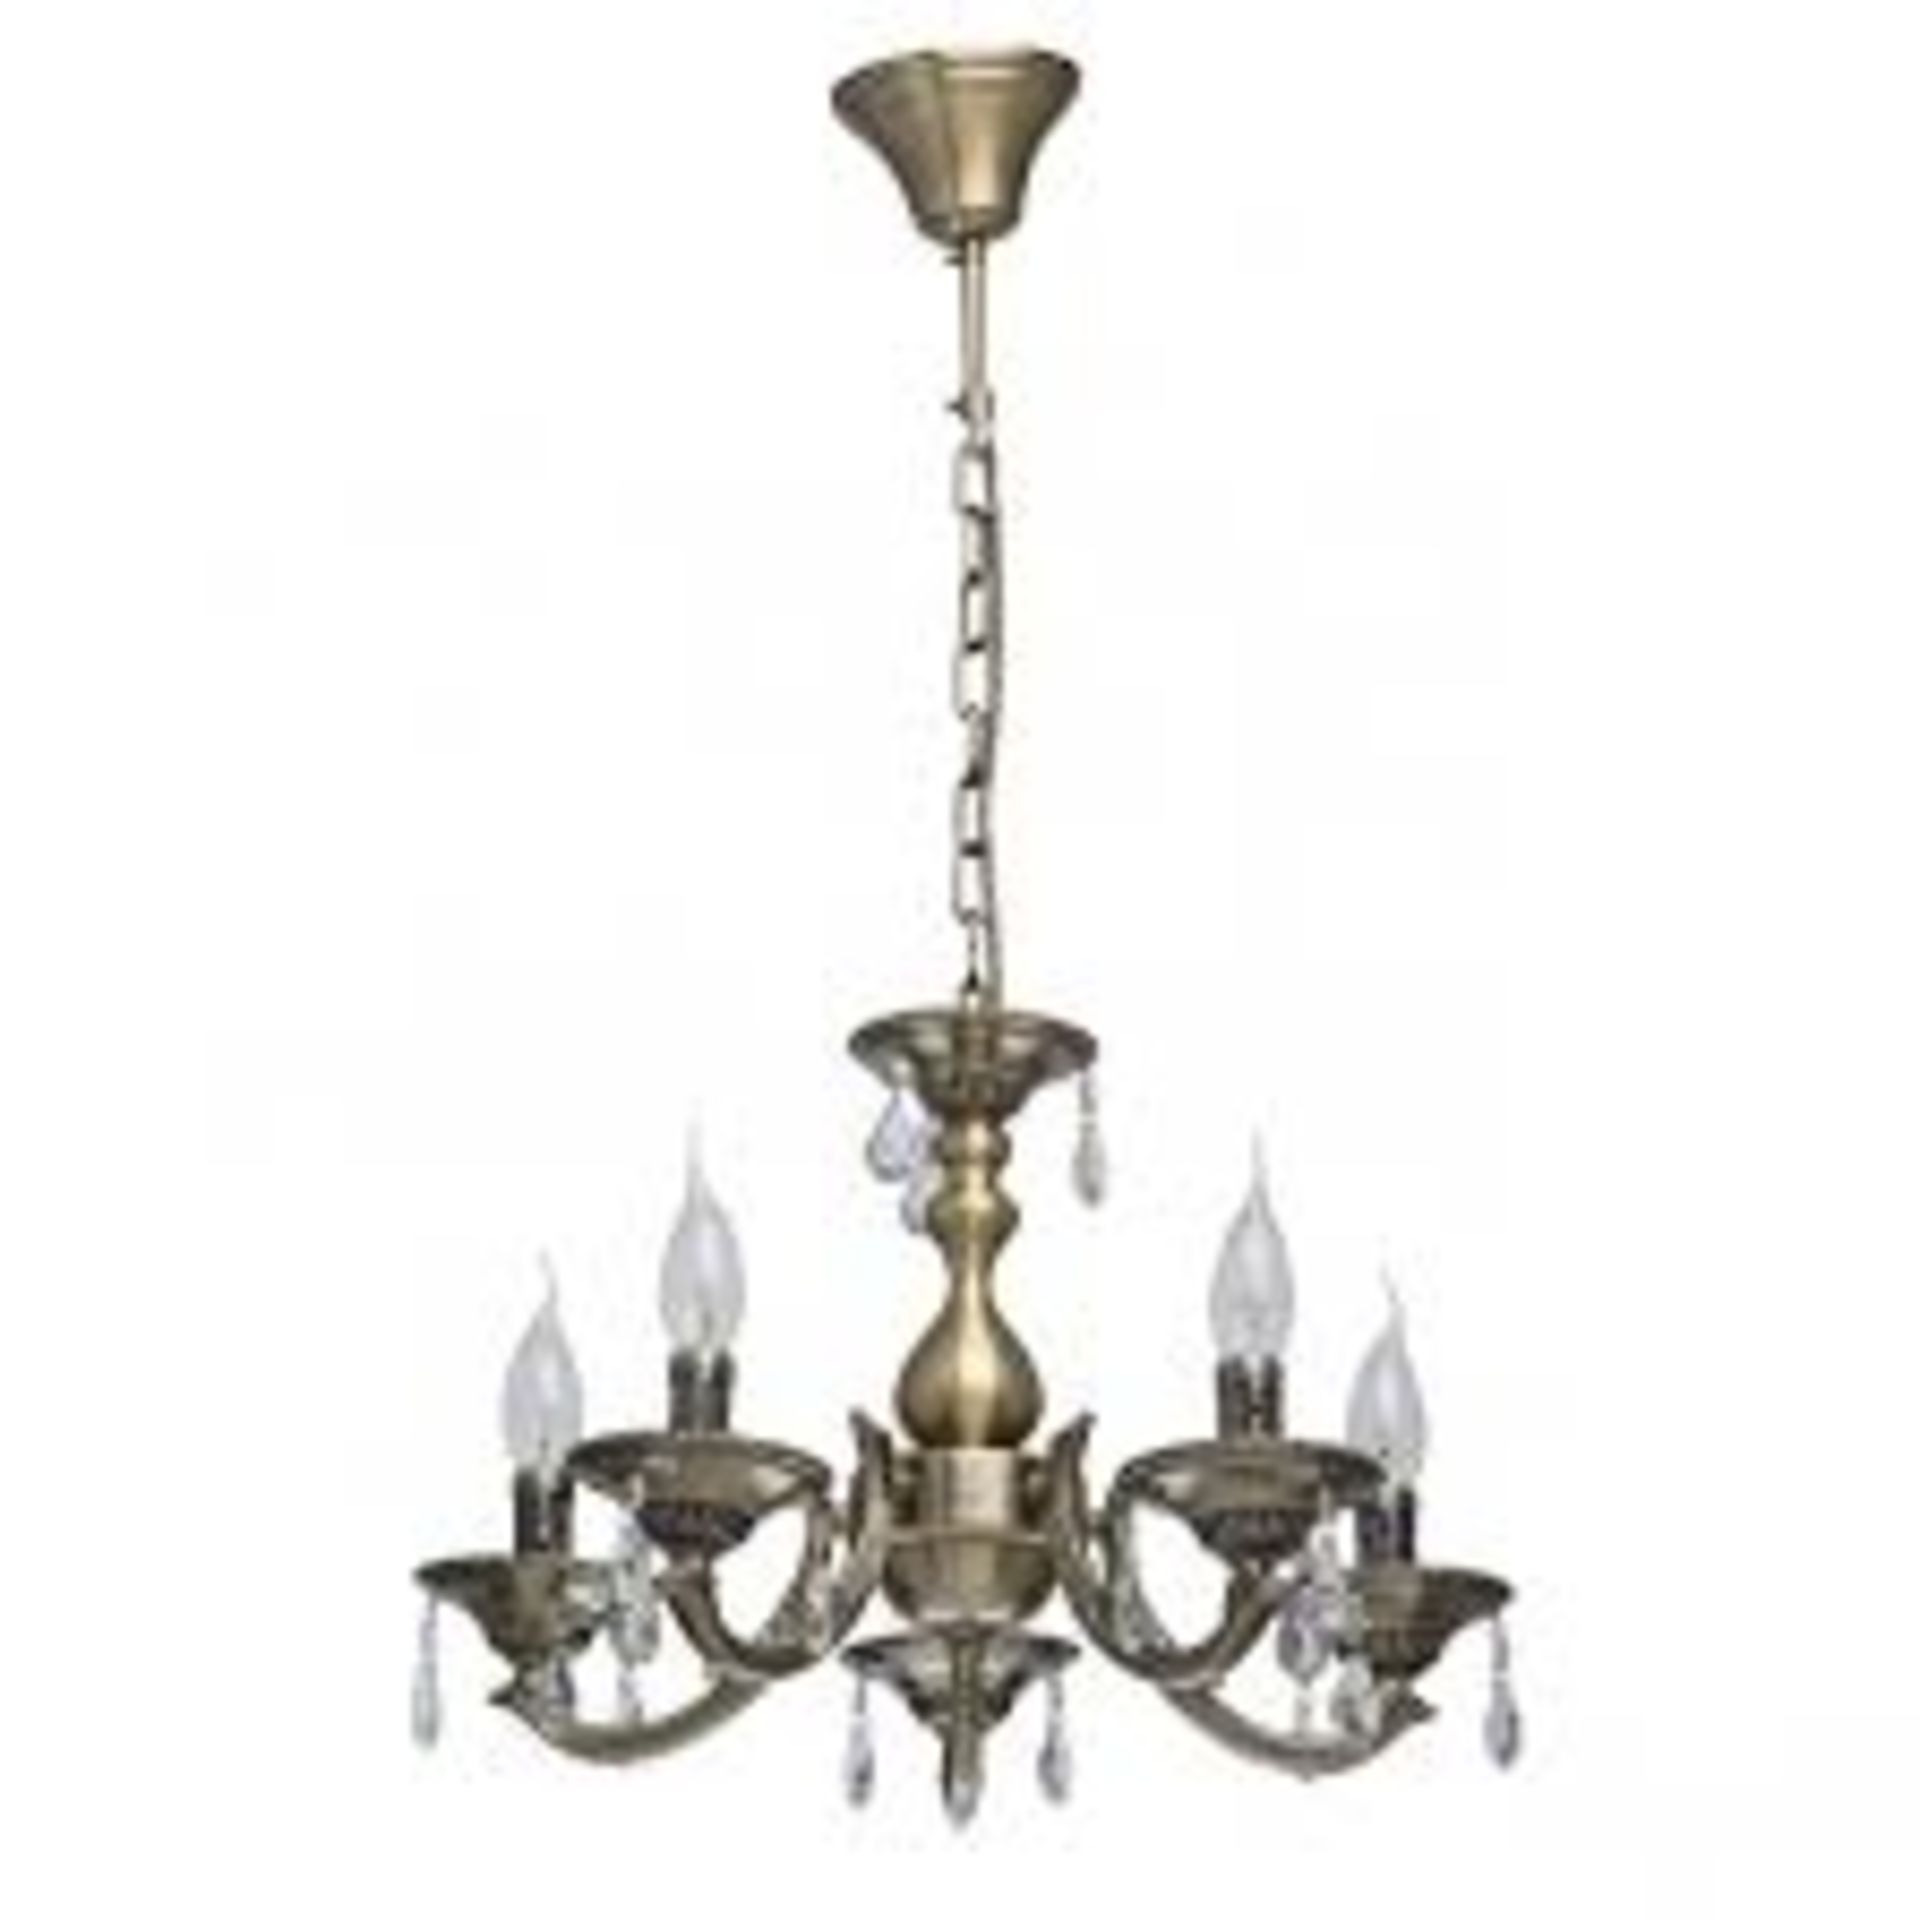 Boxed MW Chandelier Style Ceiling Light RRP £80 (12764)(Public Viewing and Appraisals Available)